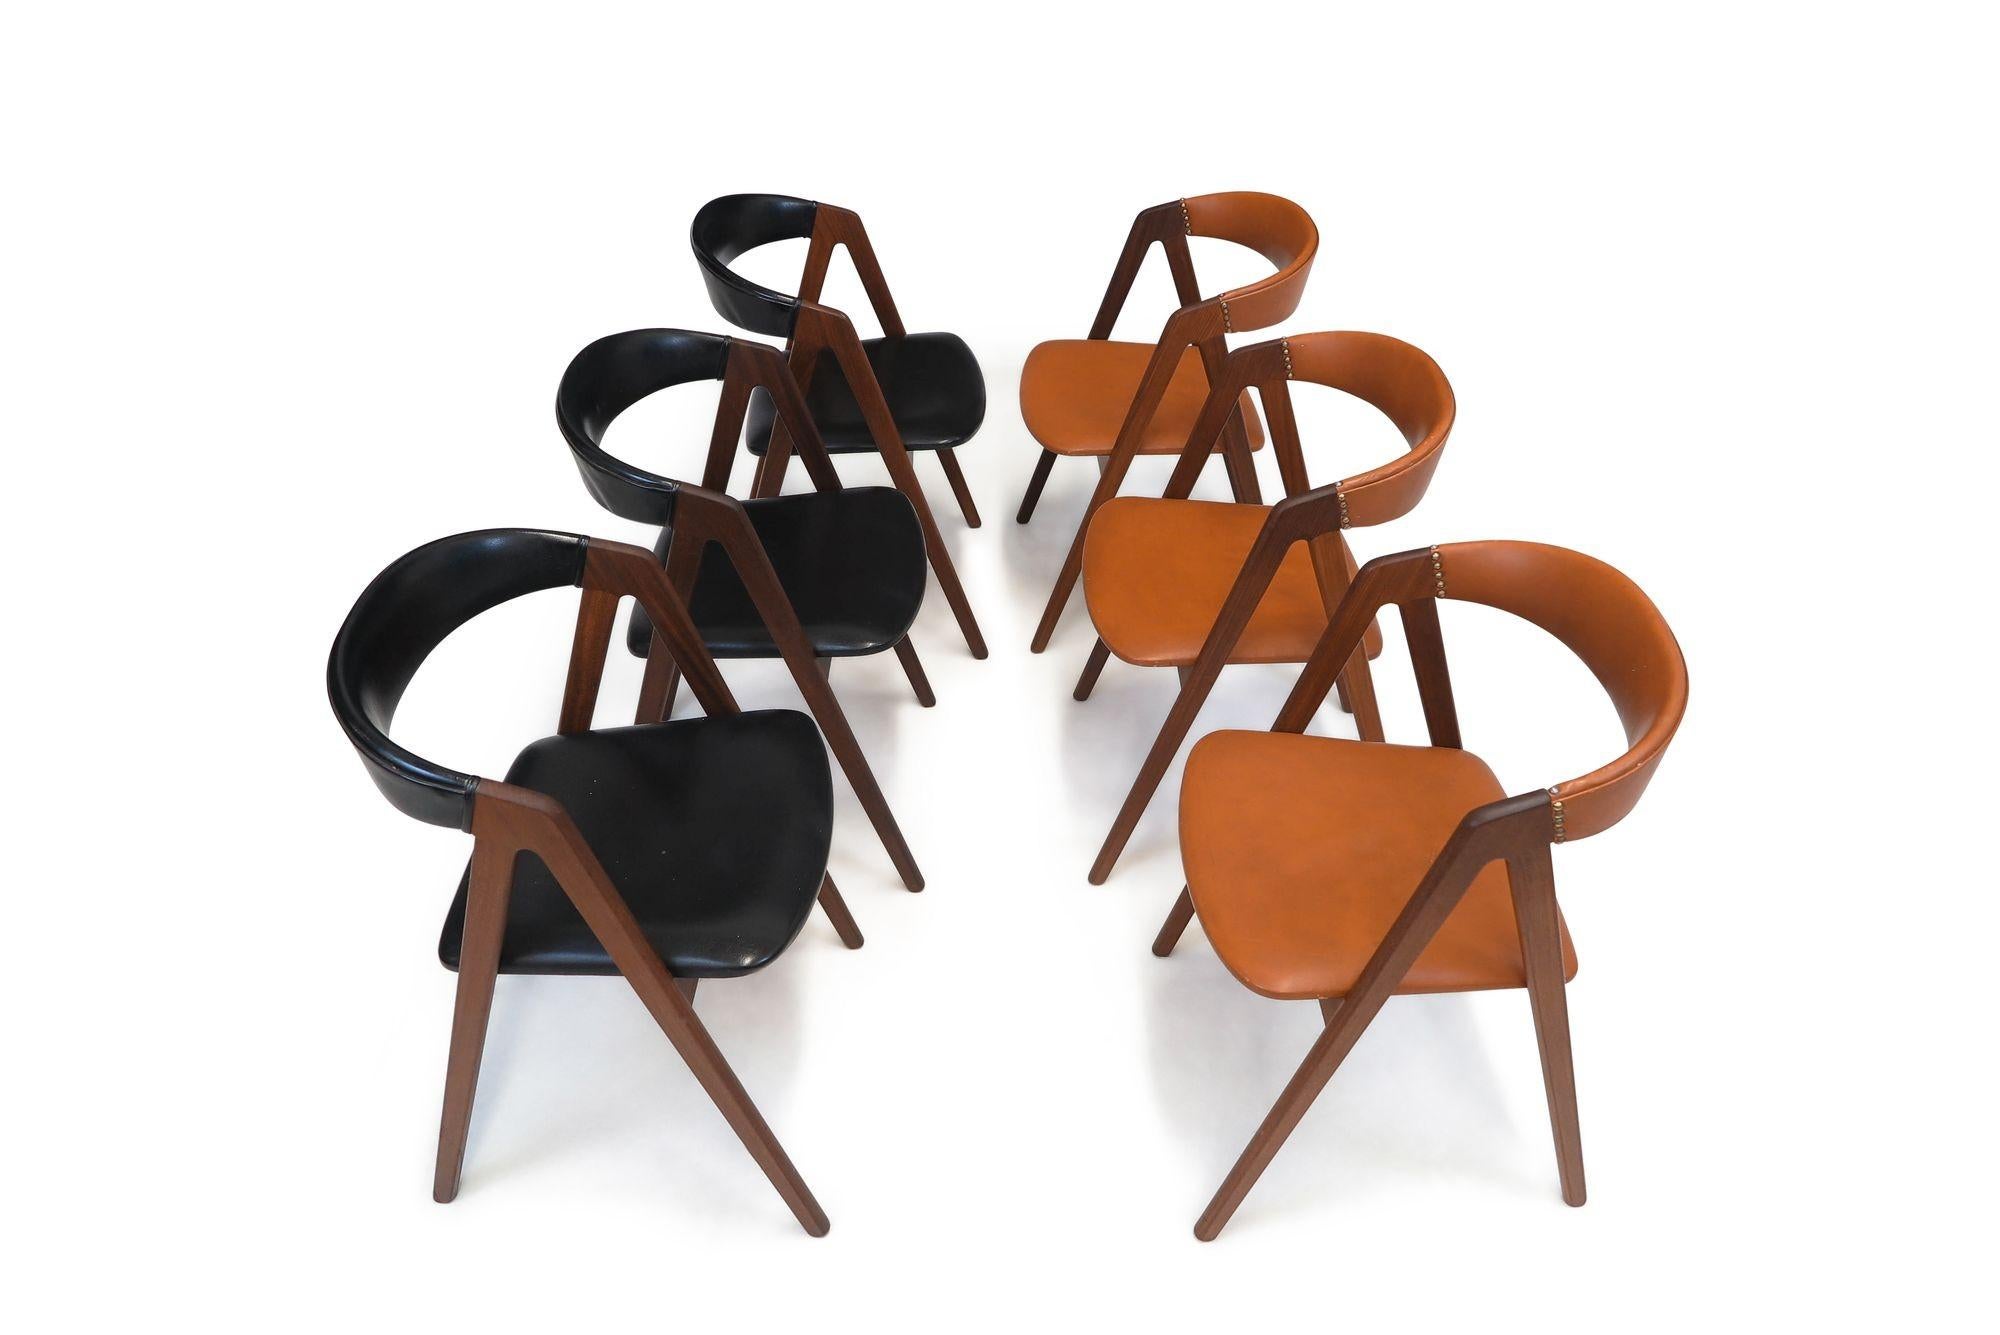 Set of six mid-century Danish solid walnut dining chairs upholstered in the original saddle and black leather.
Professionally restored wood frames. The chairs can be used in its original state, or be full reupholstered.
18+ chairs